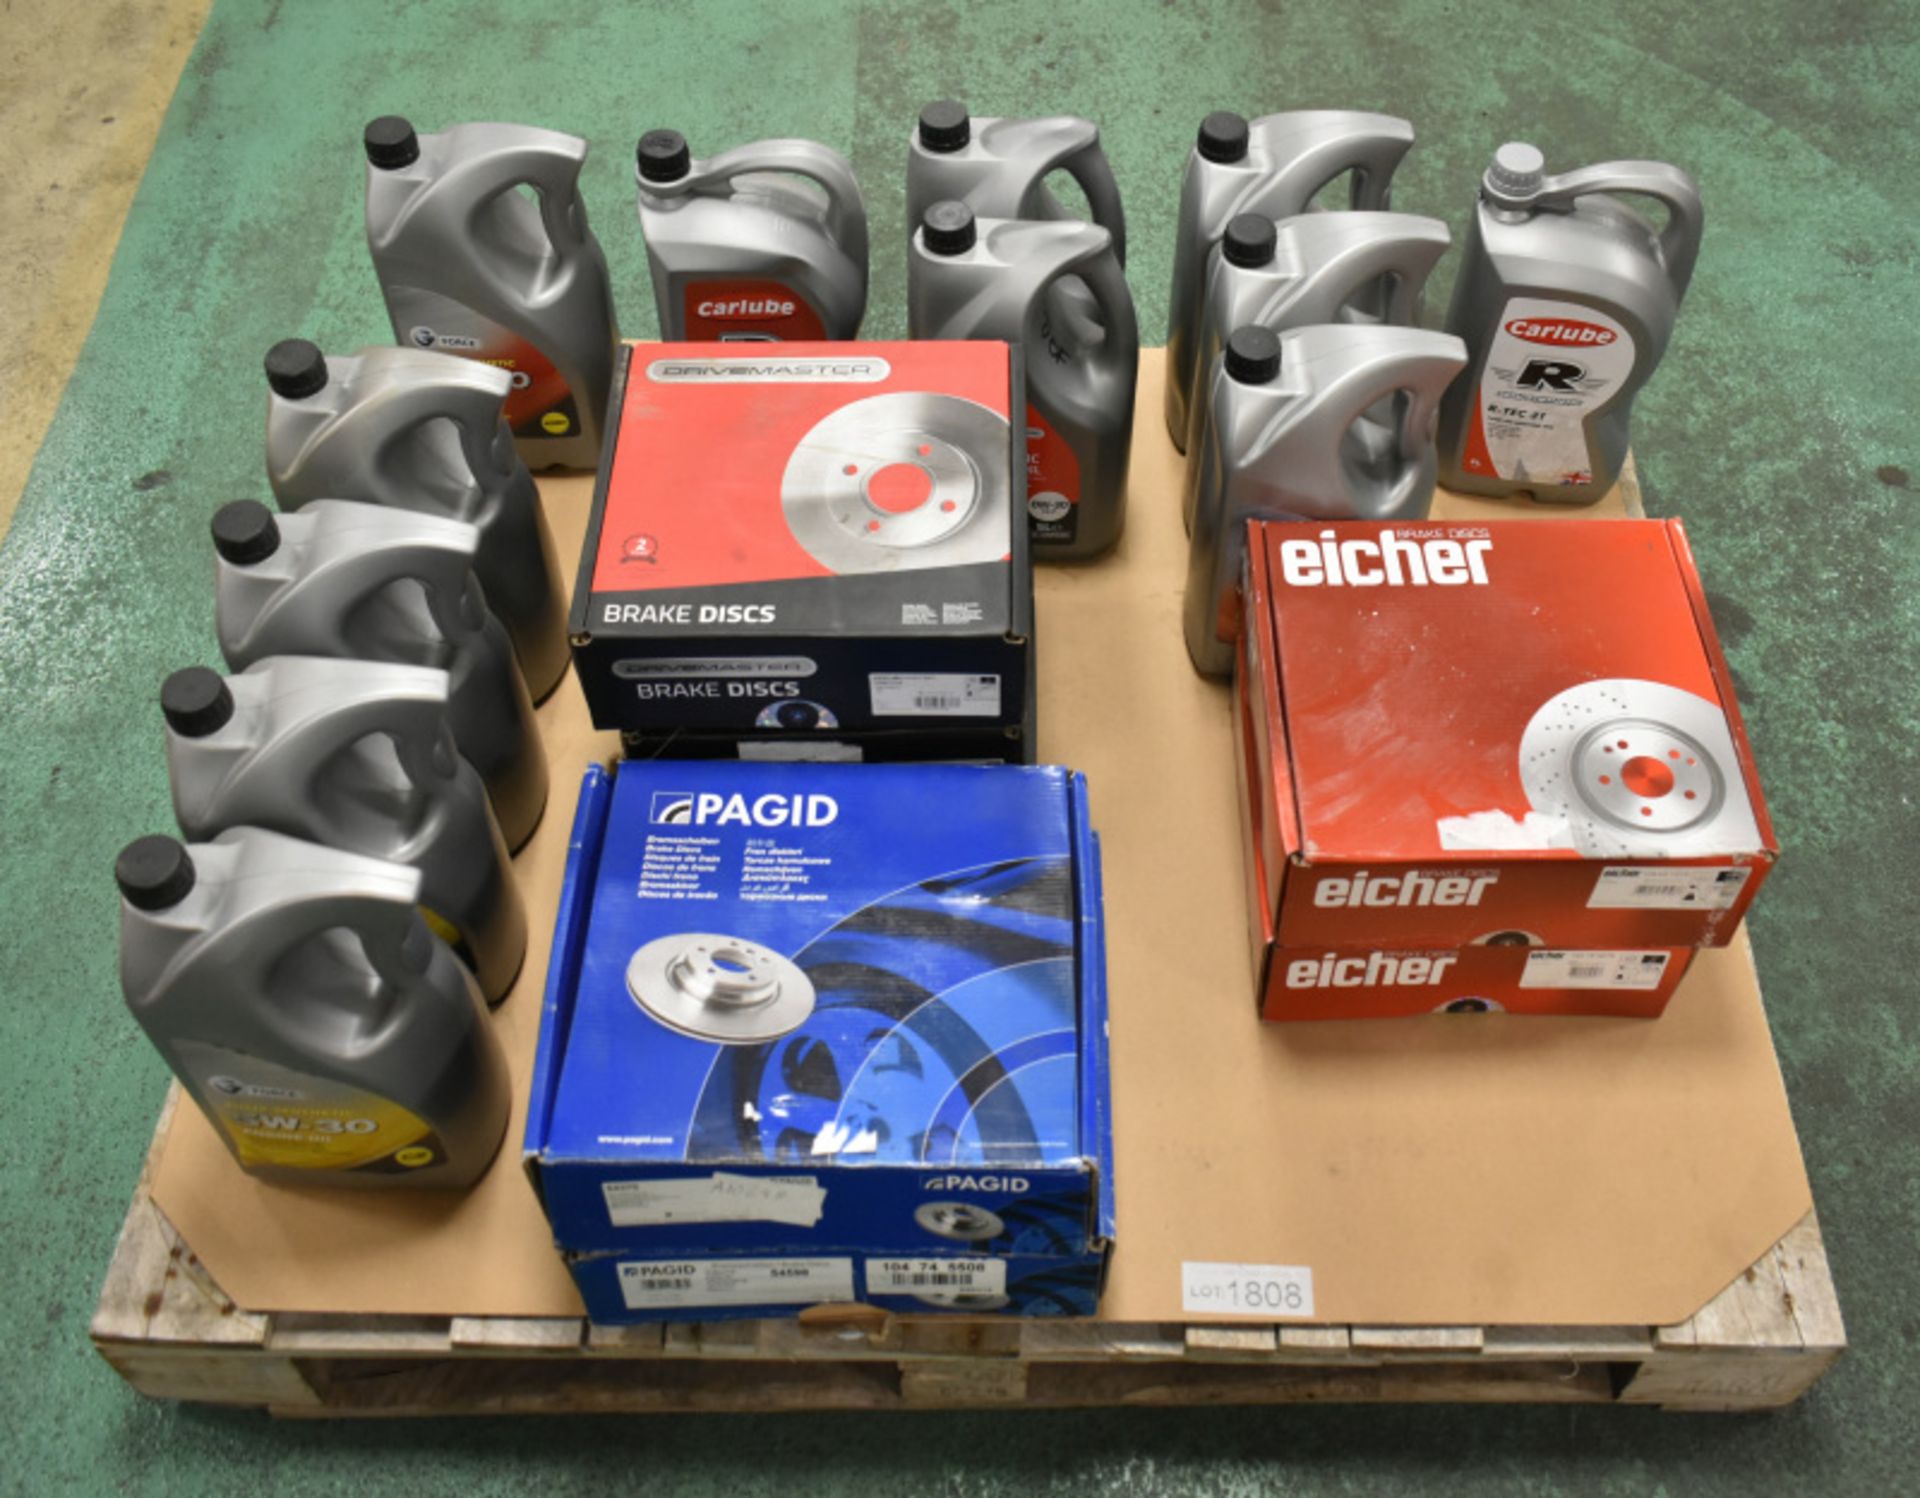 Brake discs - Drumaster, Eicher, Pagid, Engine oil 5LTR Bottles - Carlube RTEC-31 x1 and more